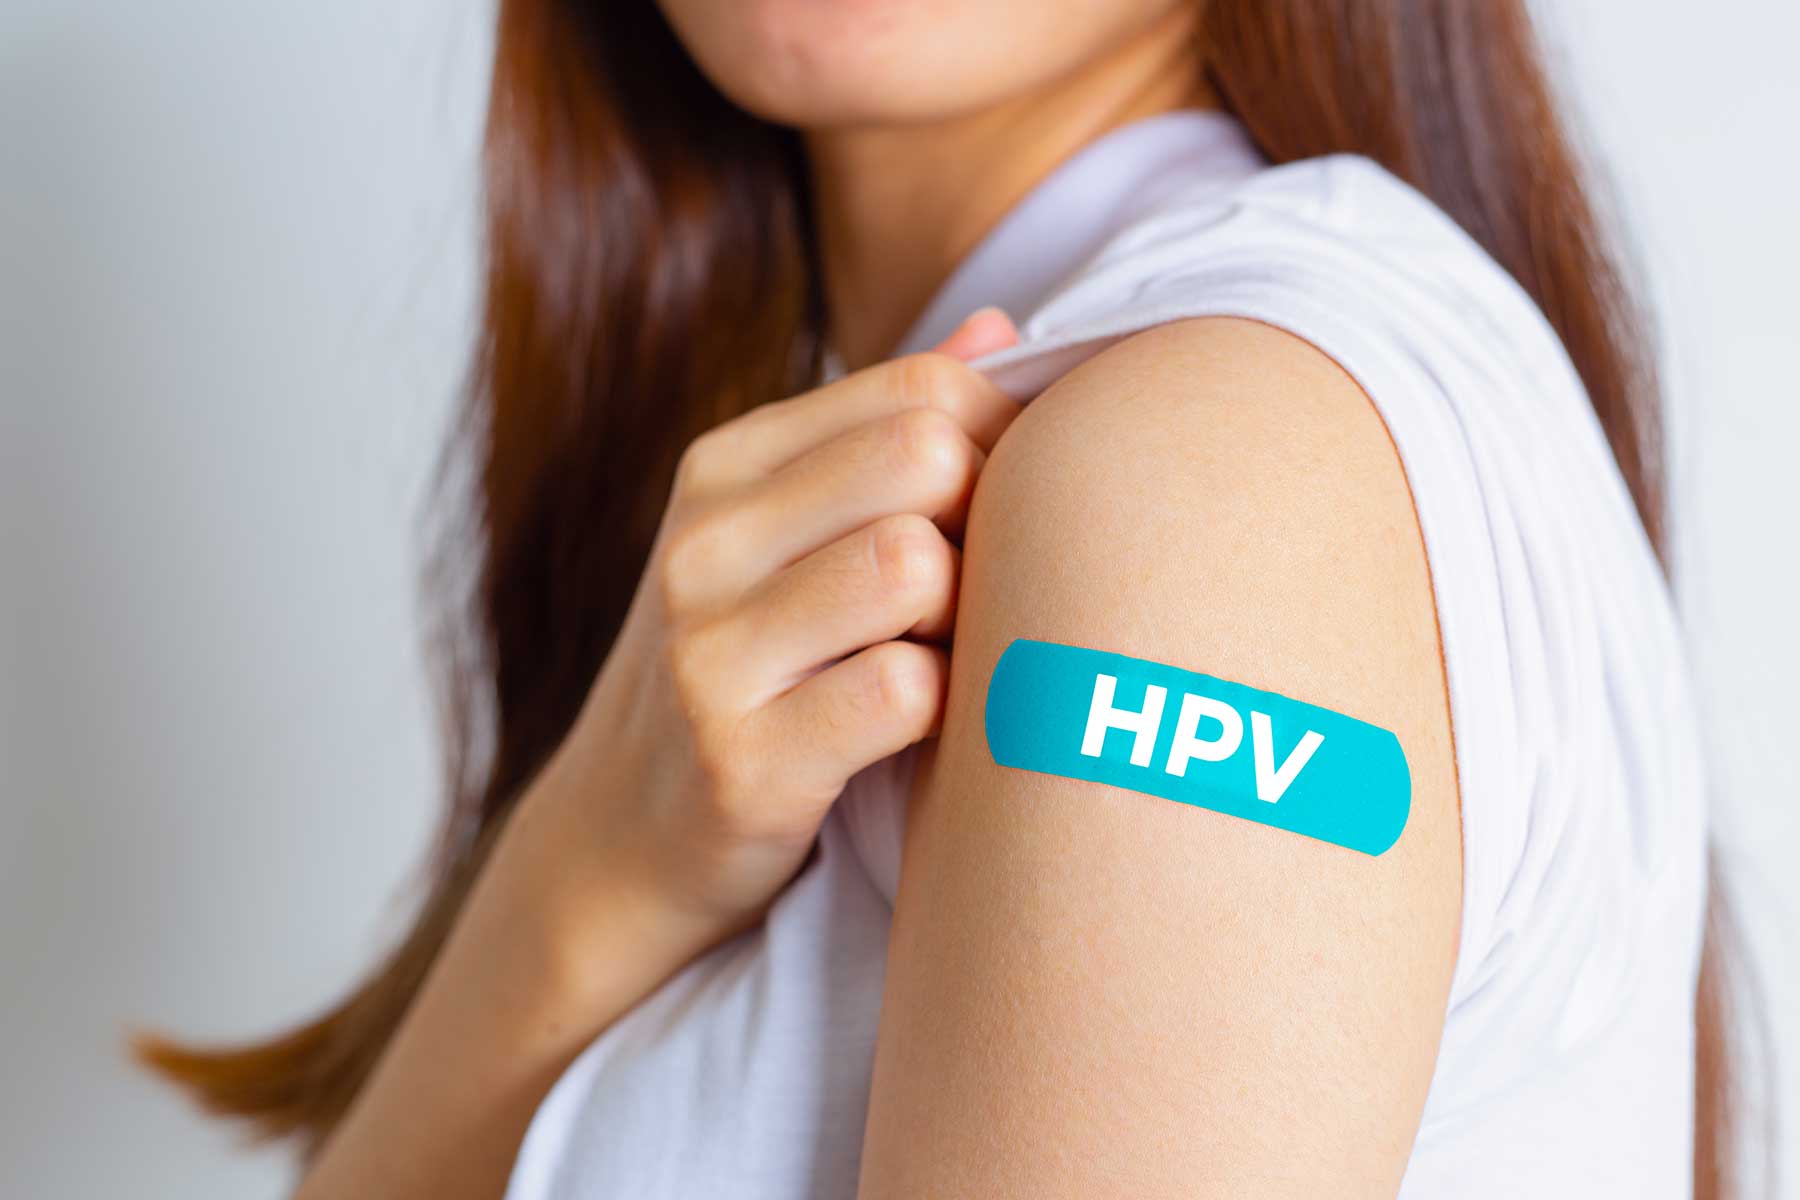 Advice On The Human Papillomavirus Hpv Vaccine Has Changed What You